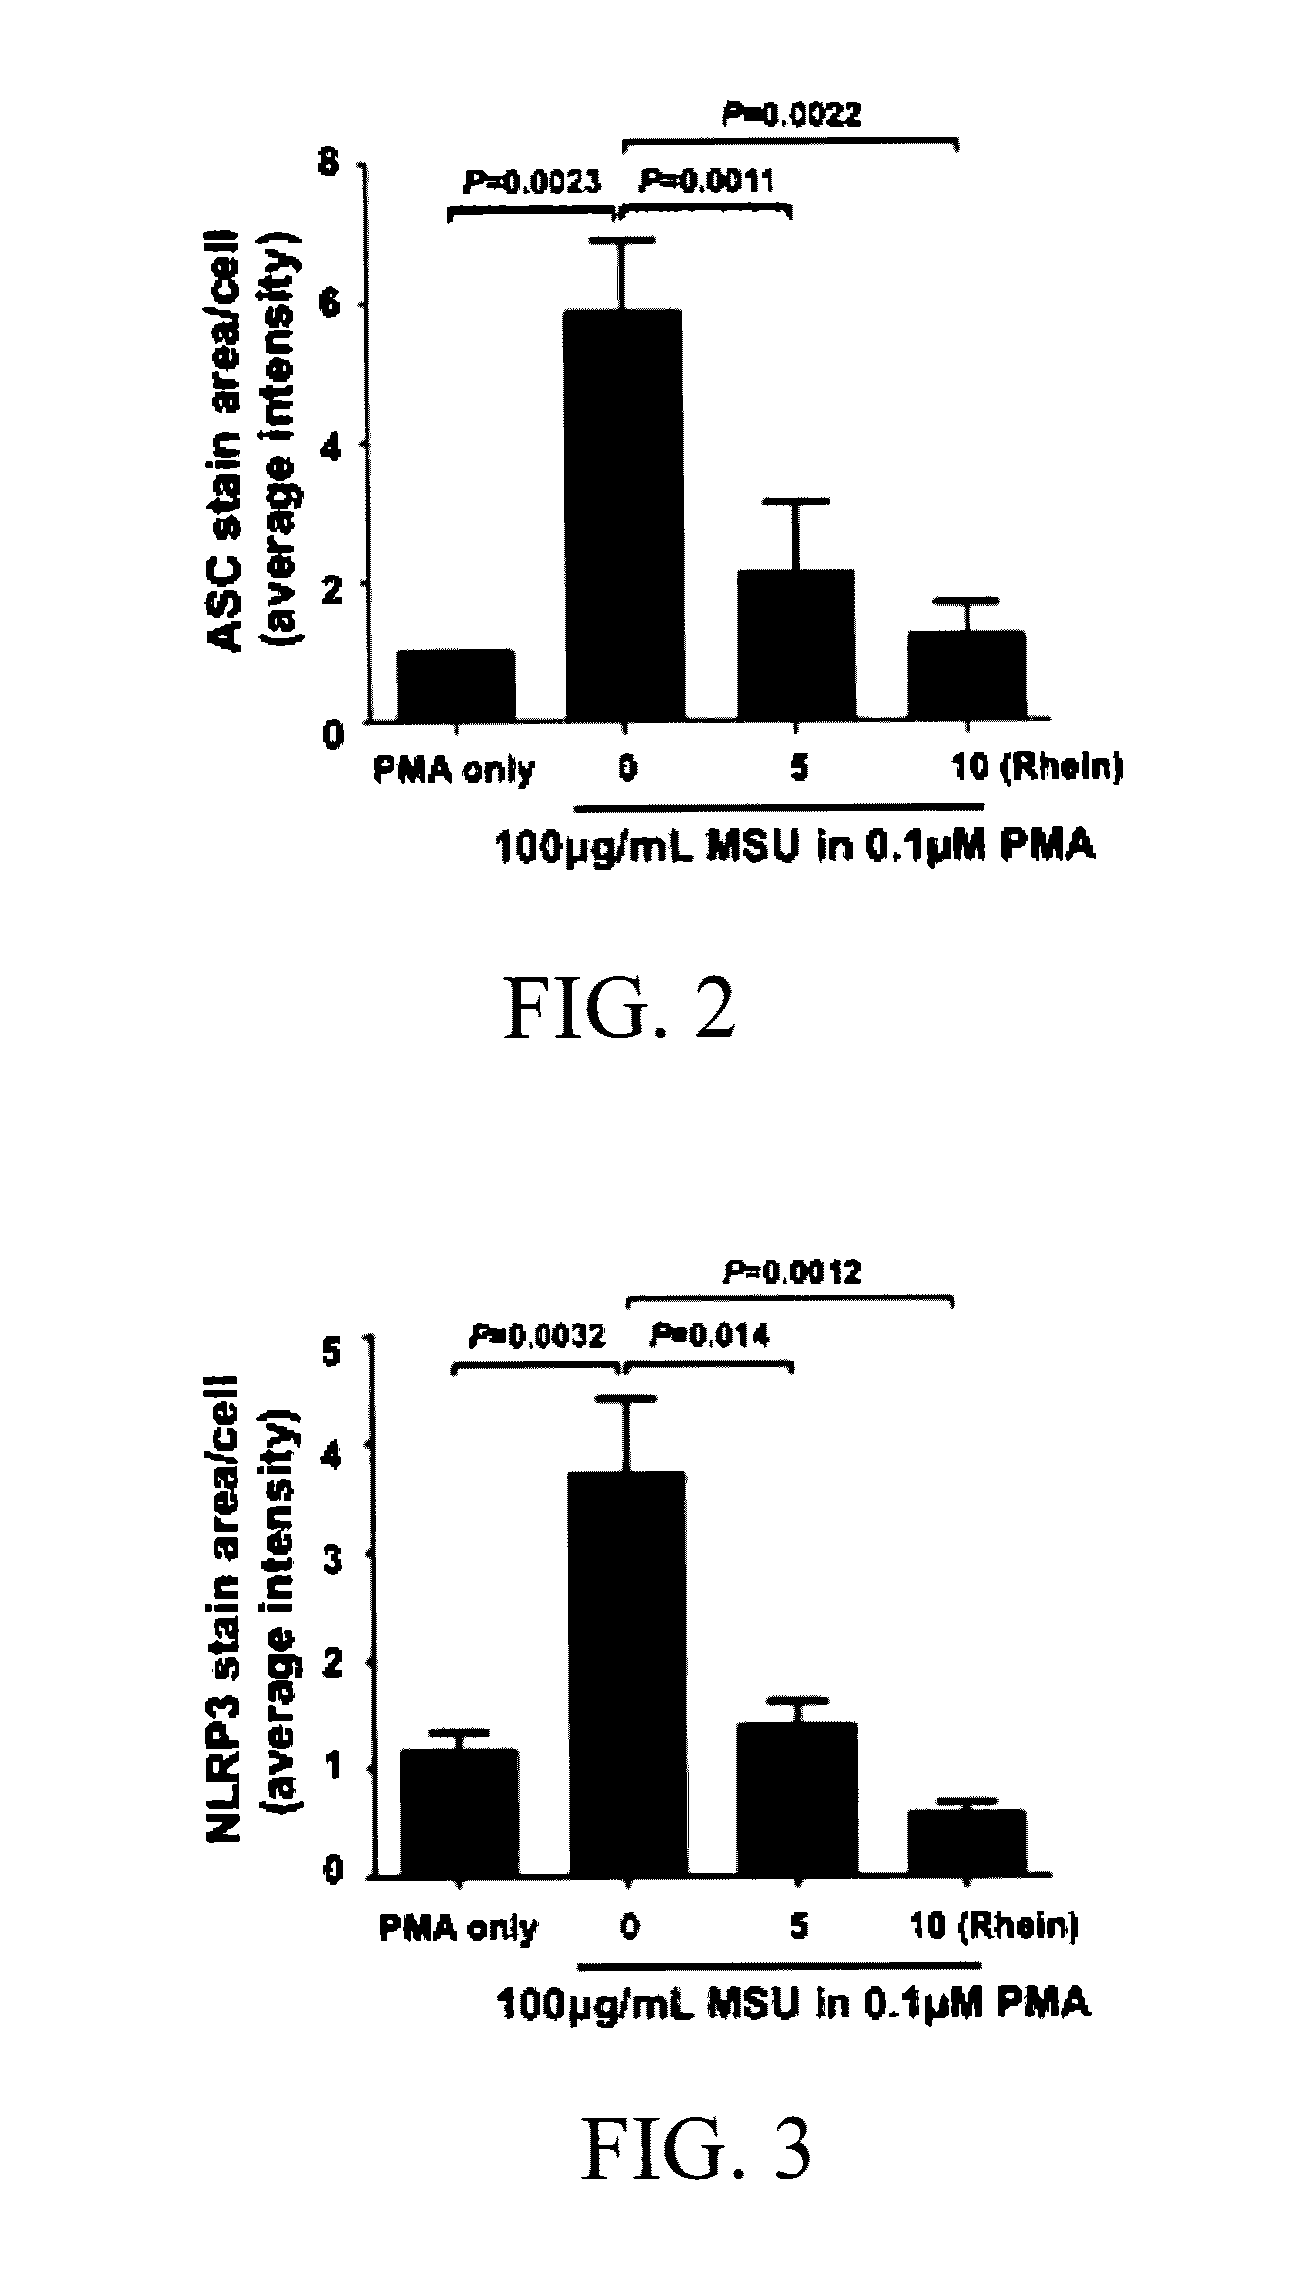 Methods for inhibiting expression of asc, expression of nlrp3, and/or formation of nlrp3 inflammasome complex using diacerein or its analogs